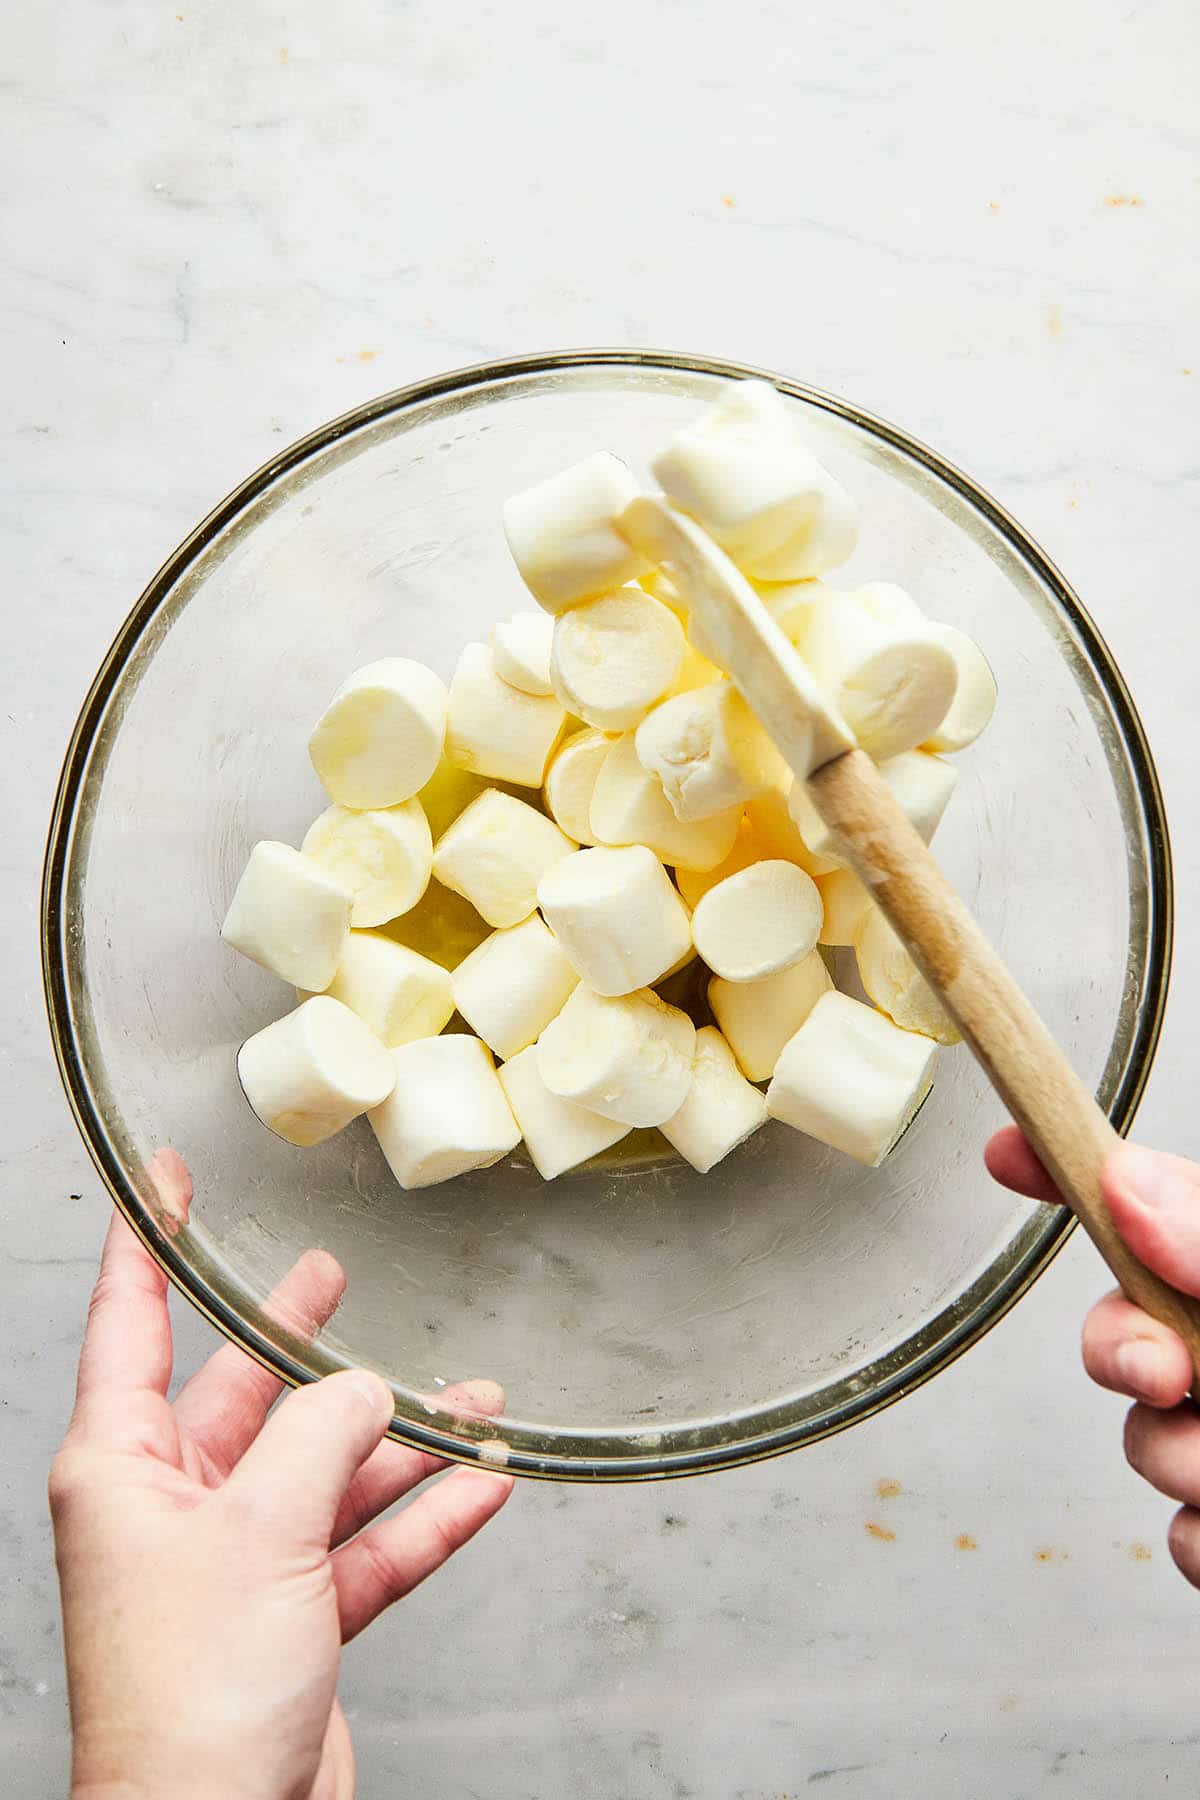 A hand stirring large marshmallows in melted butter, inside a glass mixing bowl, using a rubber spatula.